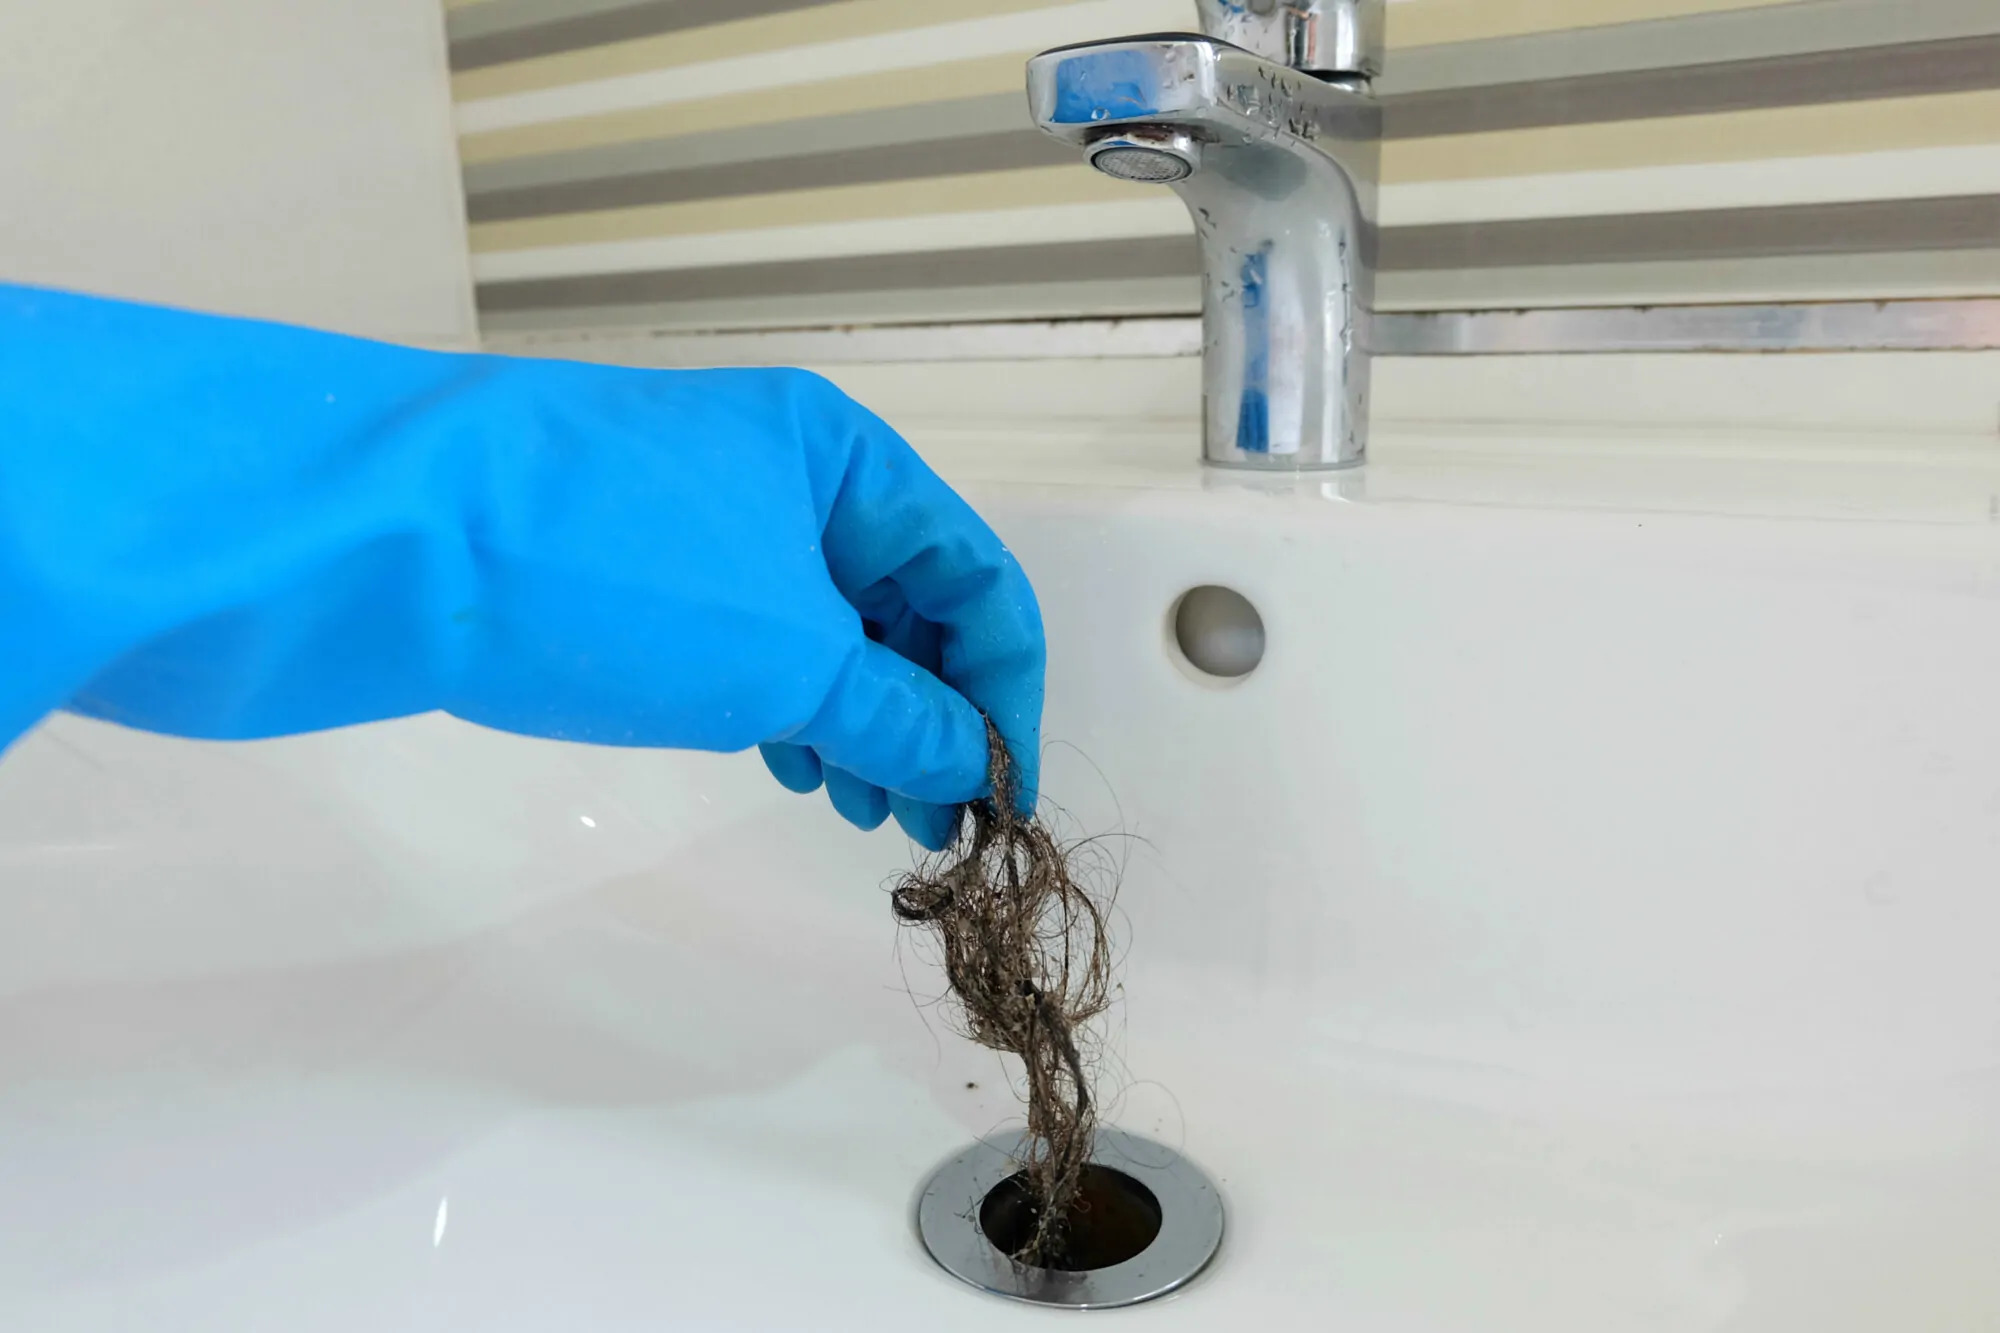 How To Prevent Hair Drain Clogs  HELP Plumbing, Heating, Cooling And Drains